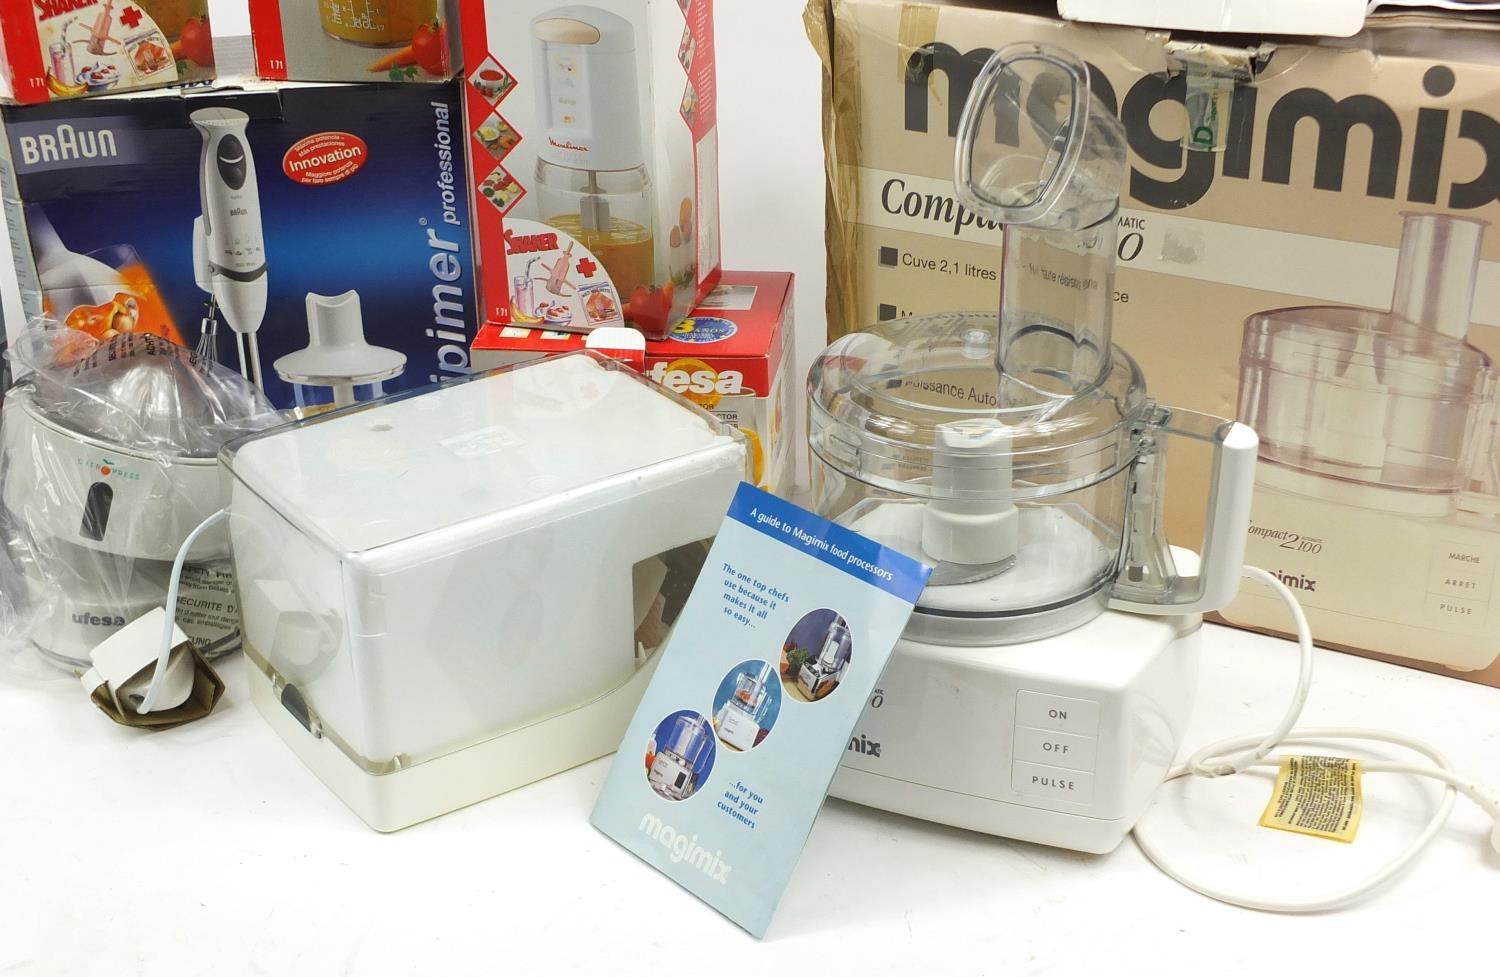 As new kitchen electricals including Magimix Compact 2100 and Braun Multiquick blender/whisk : For - Image 5 of 5